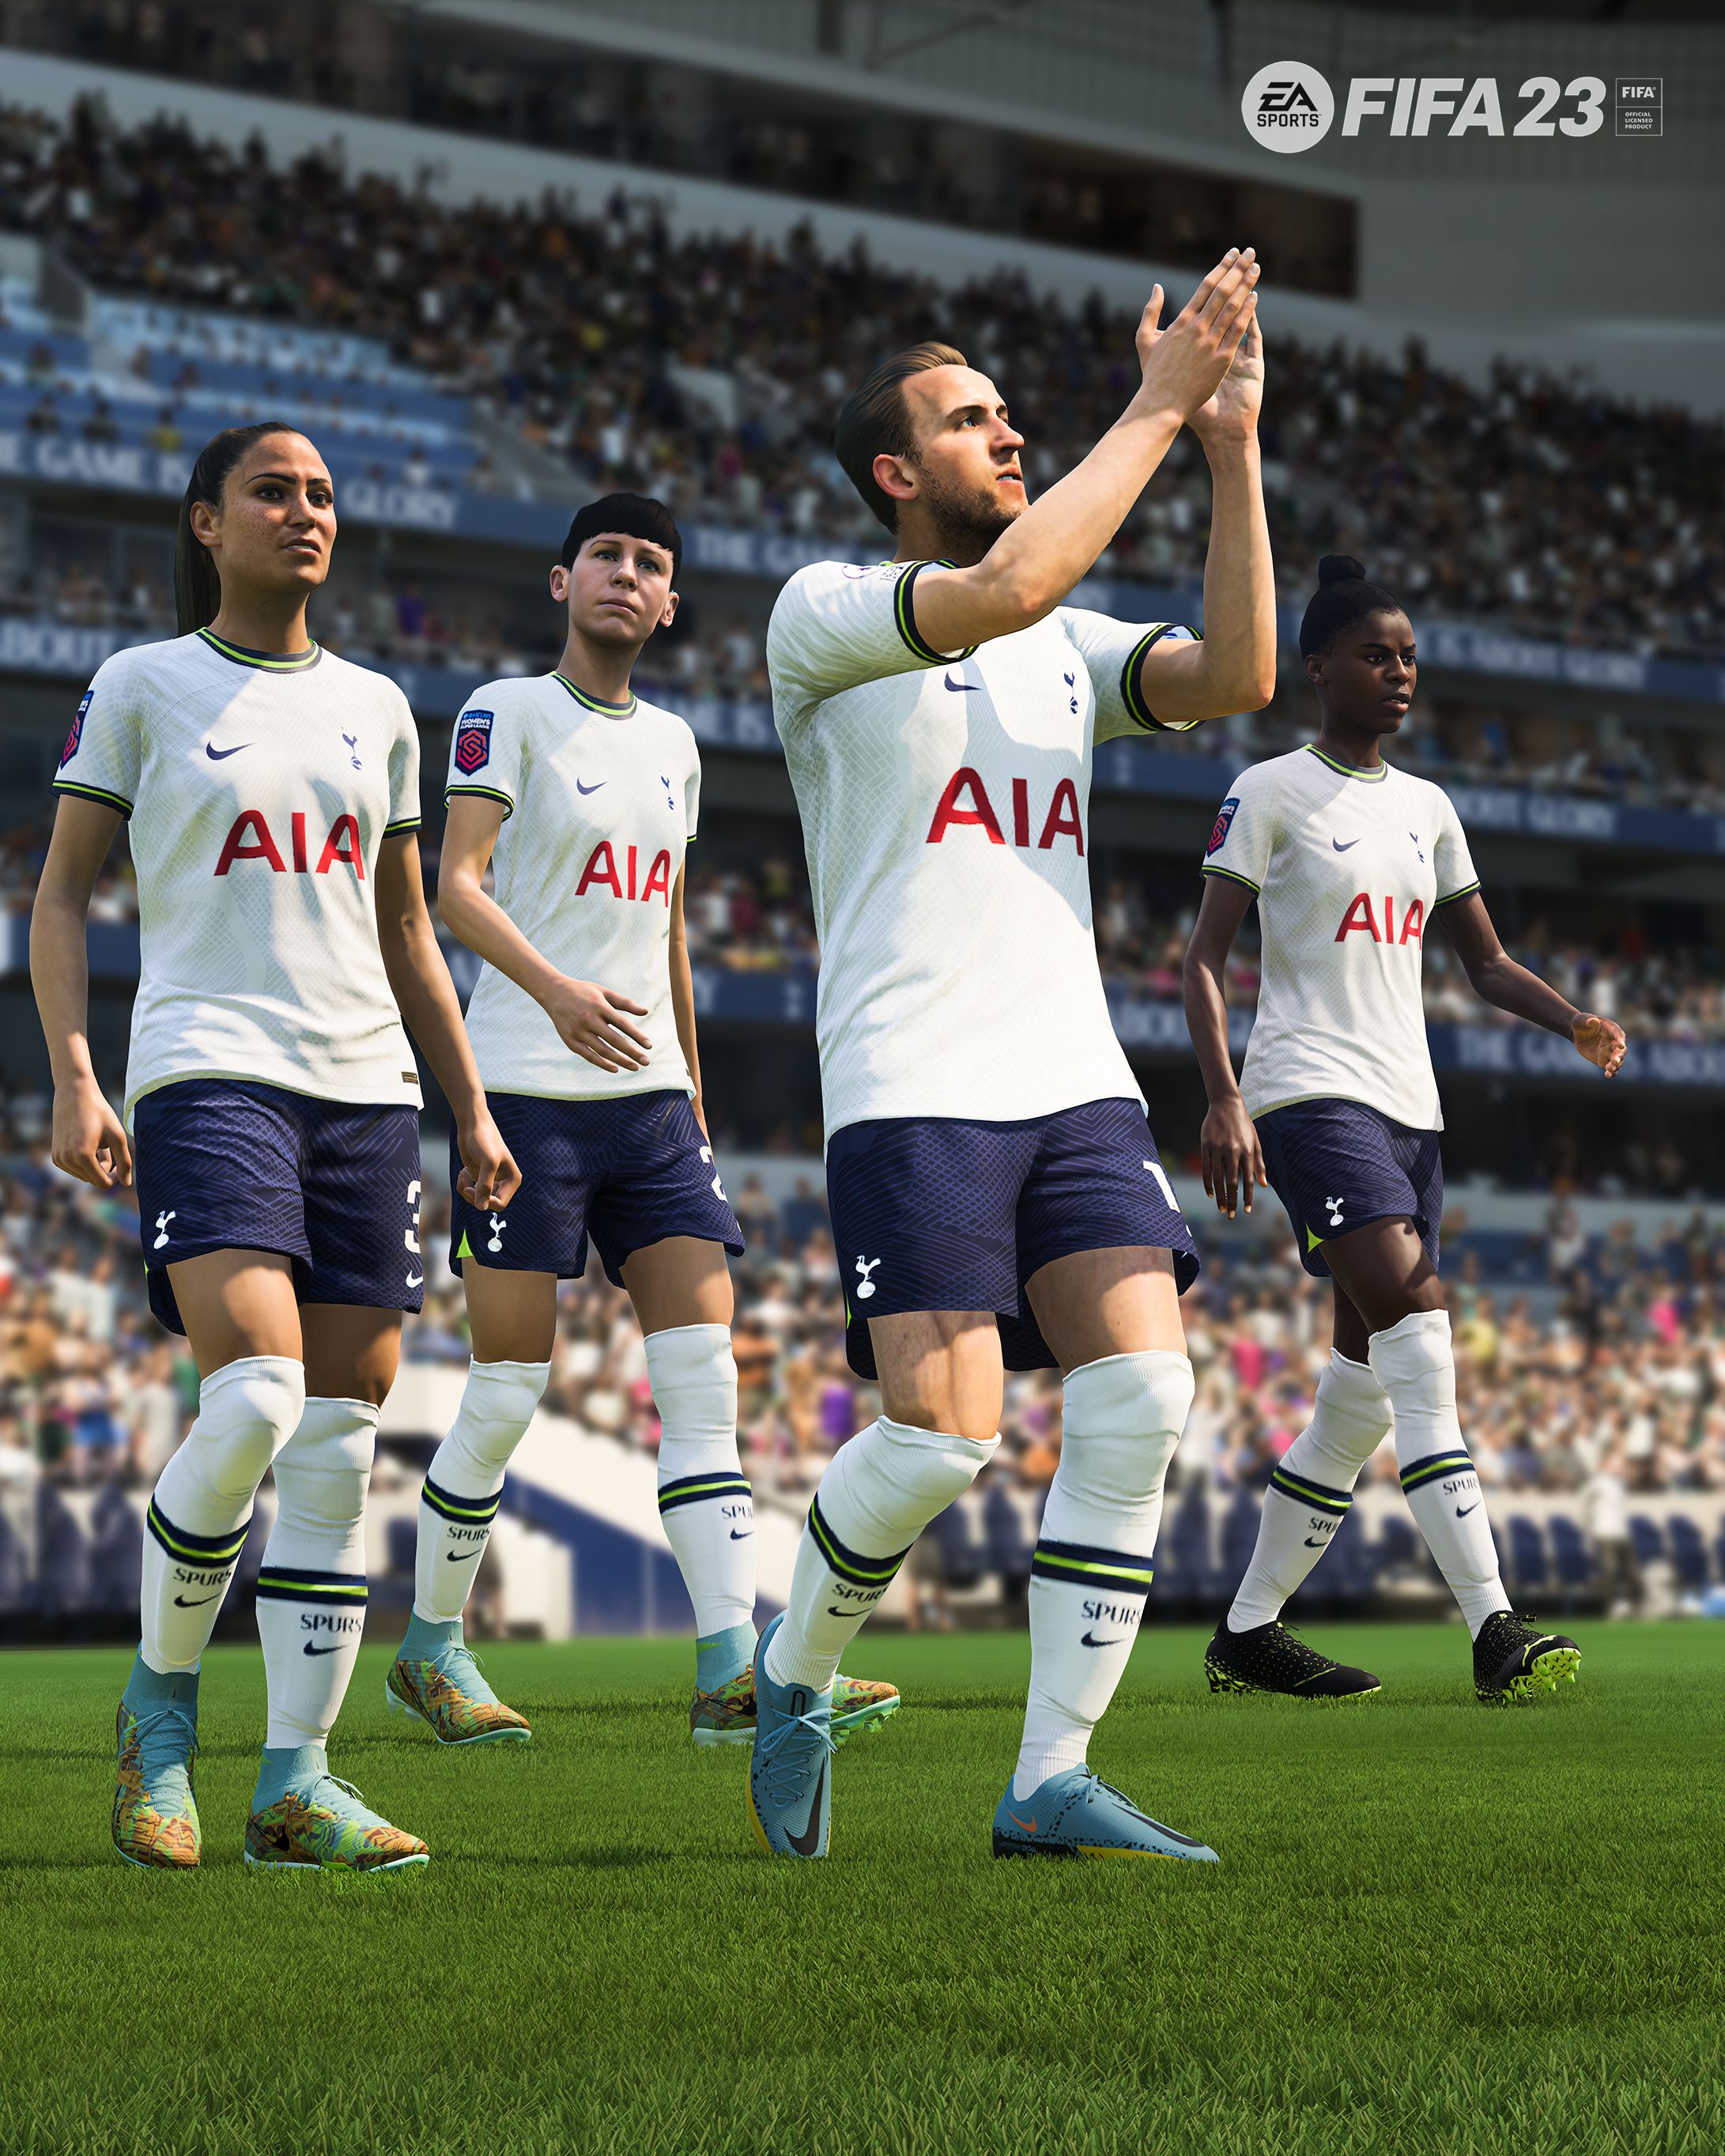 FIFA 23 gameplay footage showing Spurs players